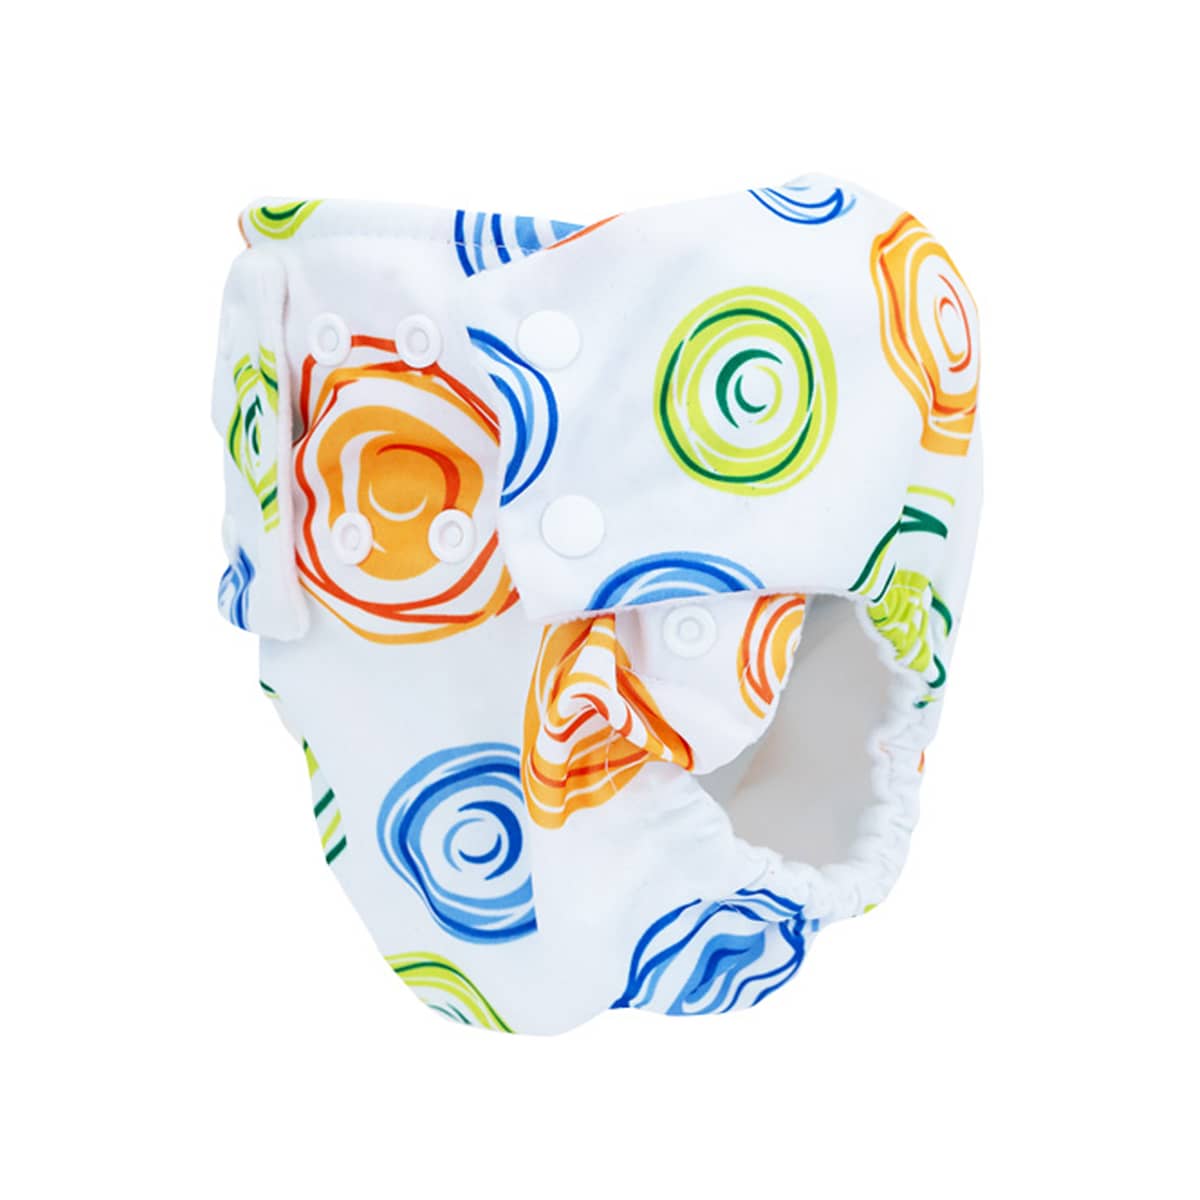 Pea Pods One Size Reusable Nappy - Swirl Print